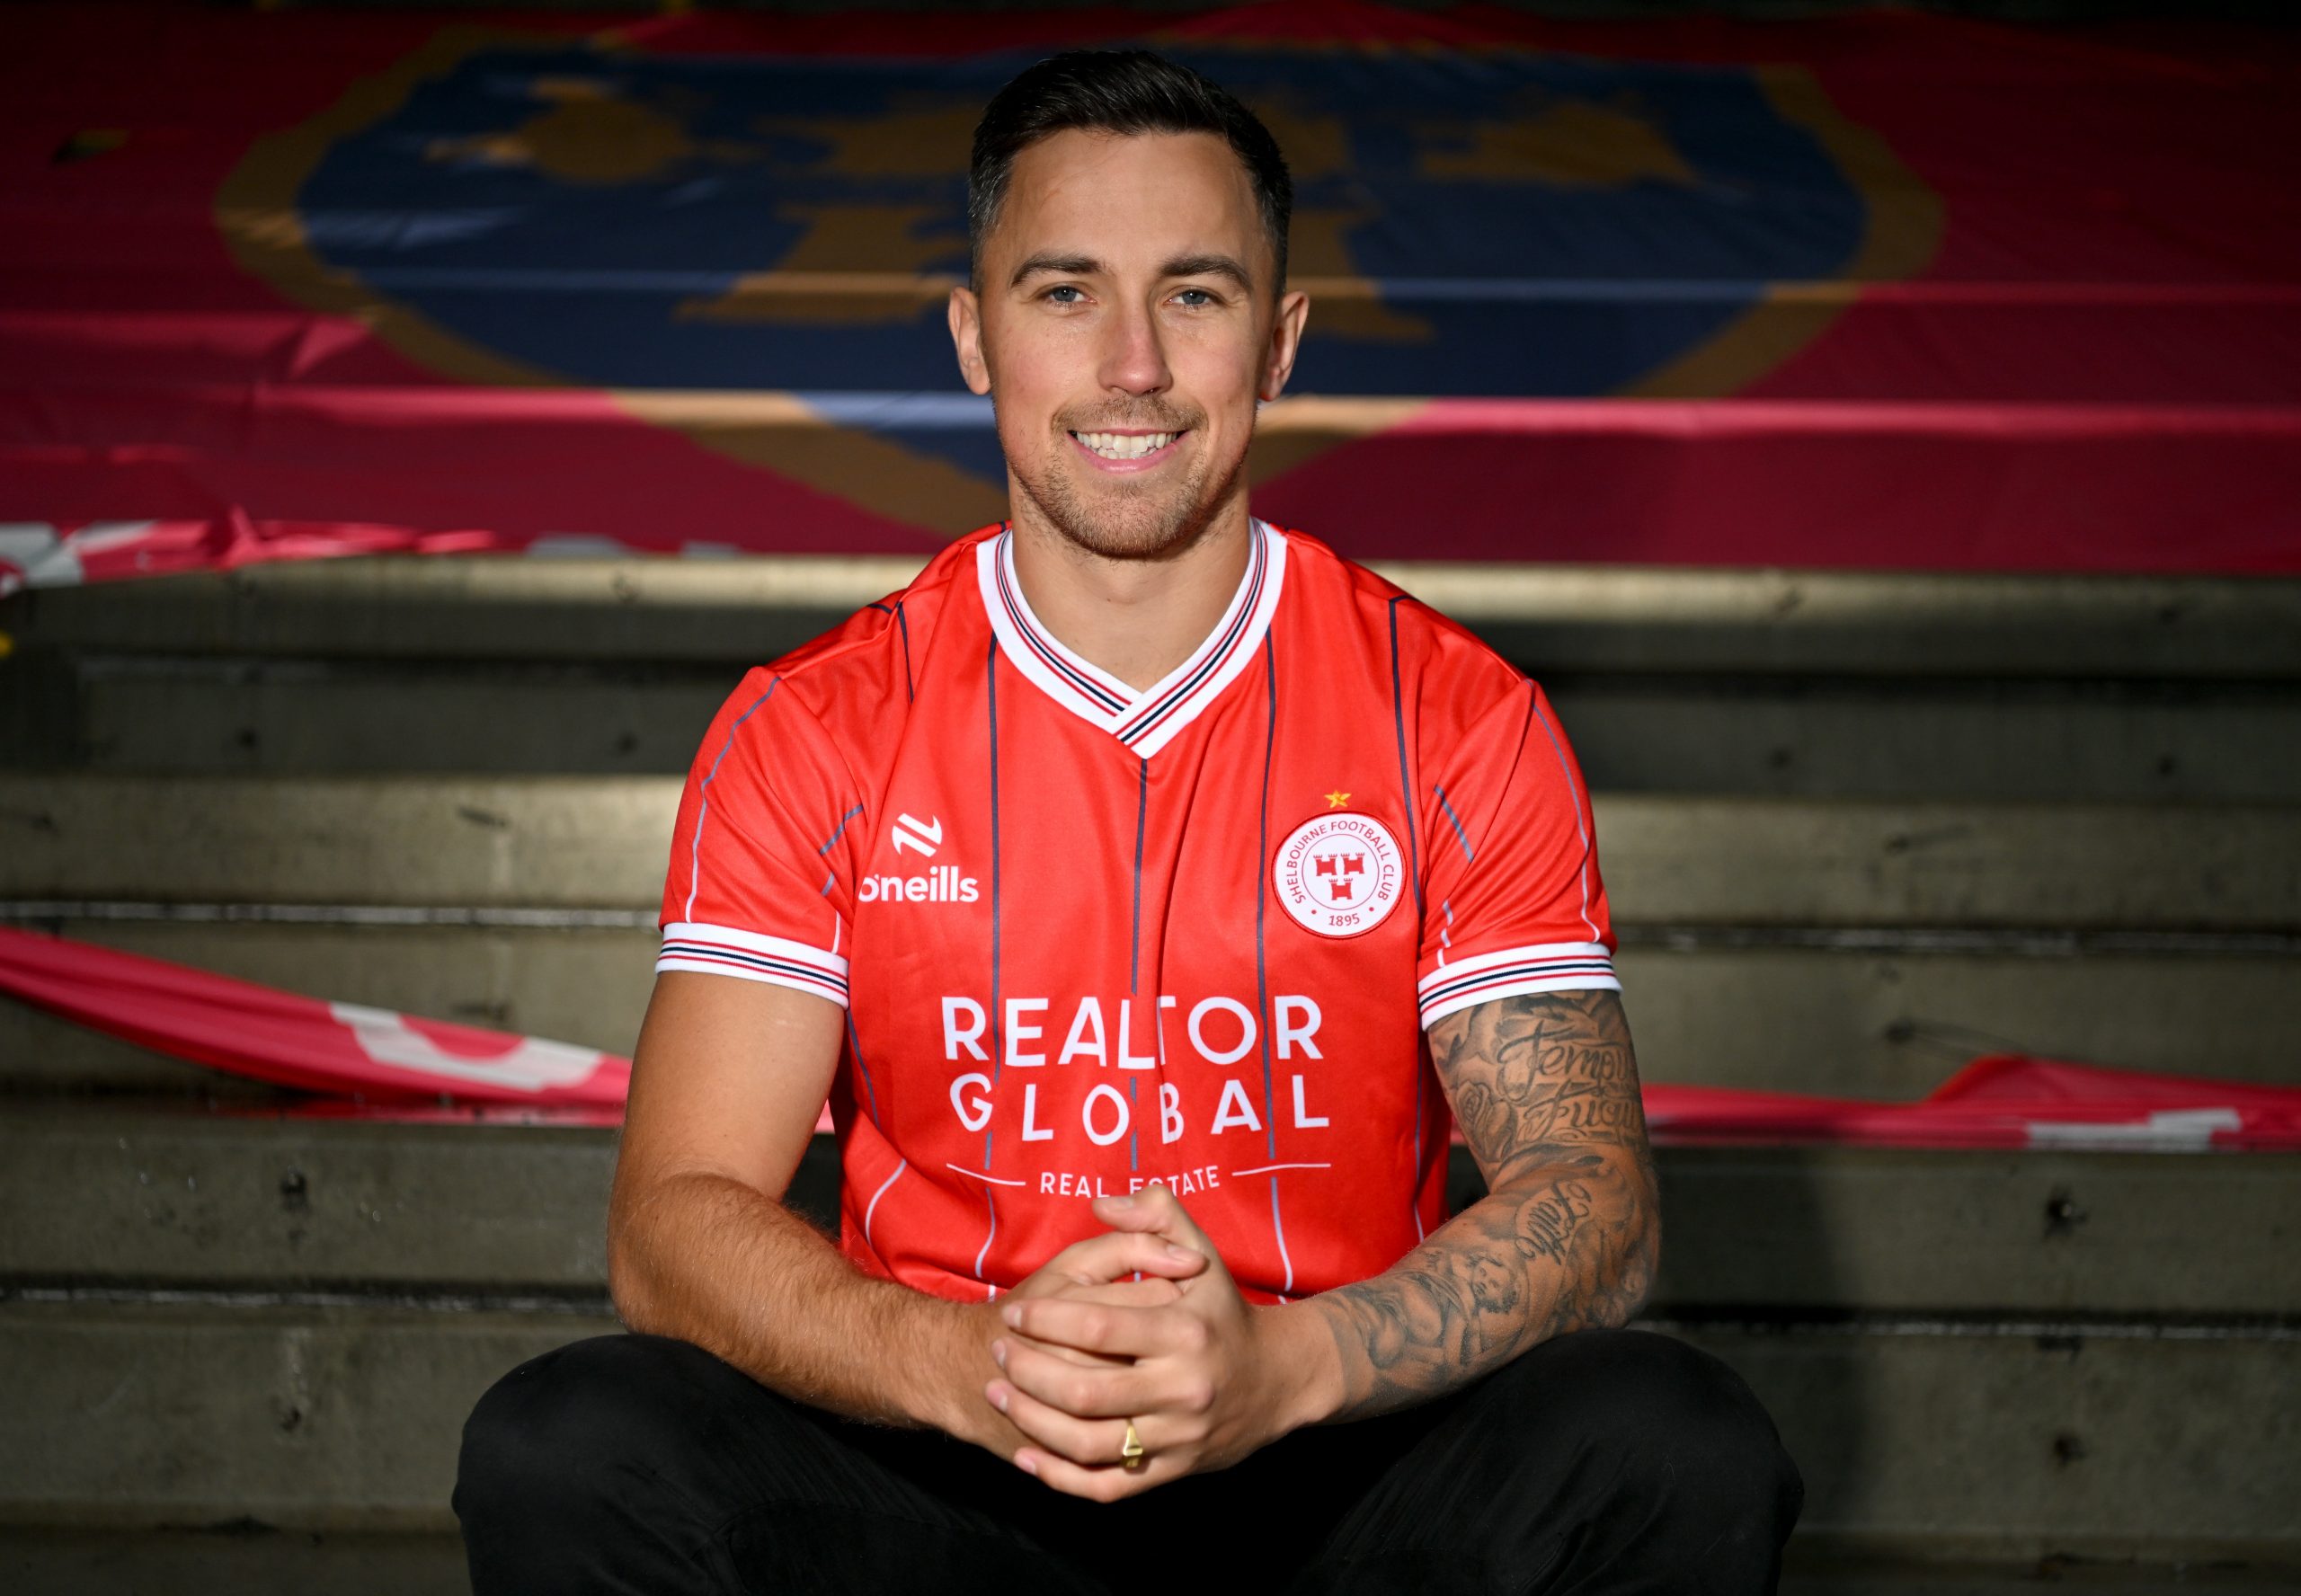 John O’Sullivan signs for the Reds